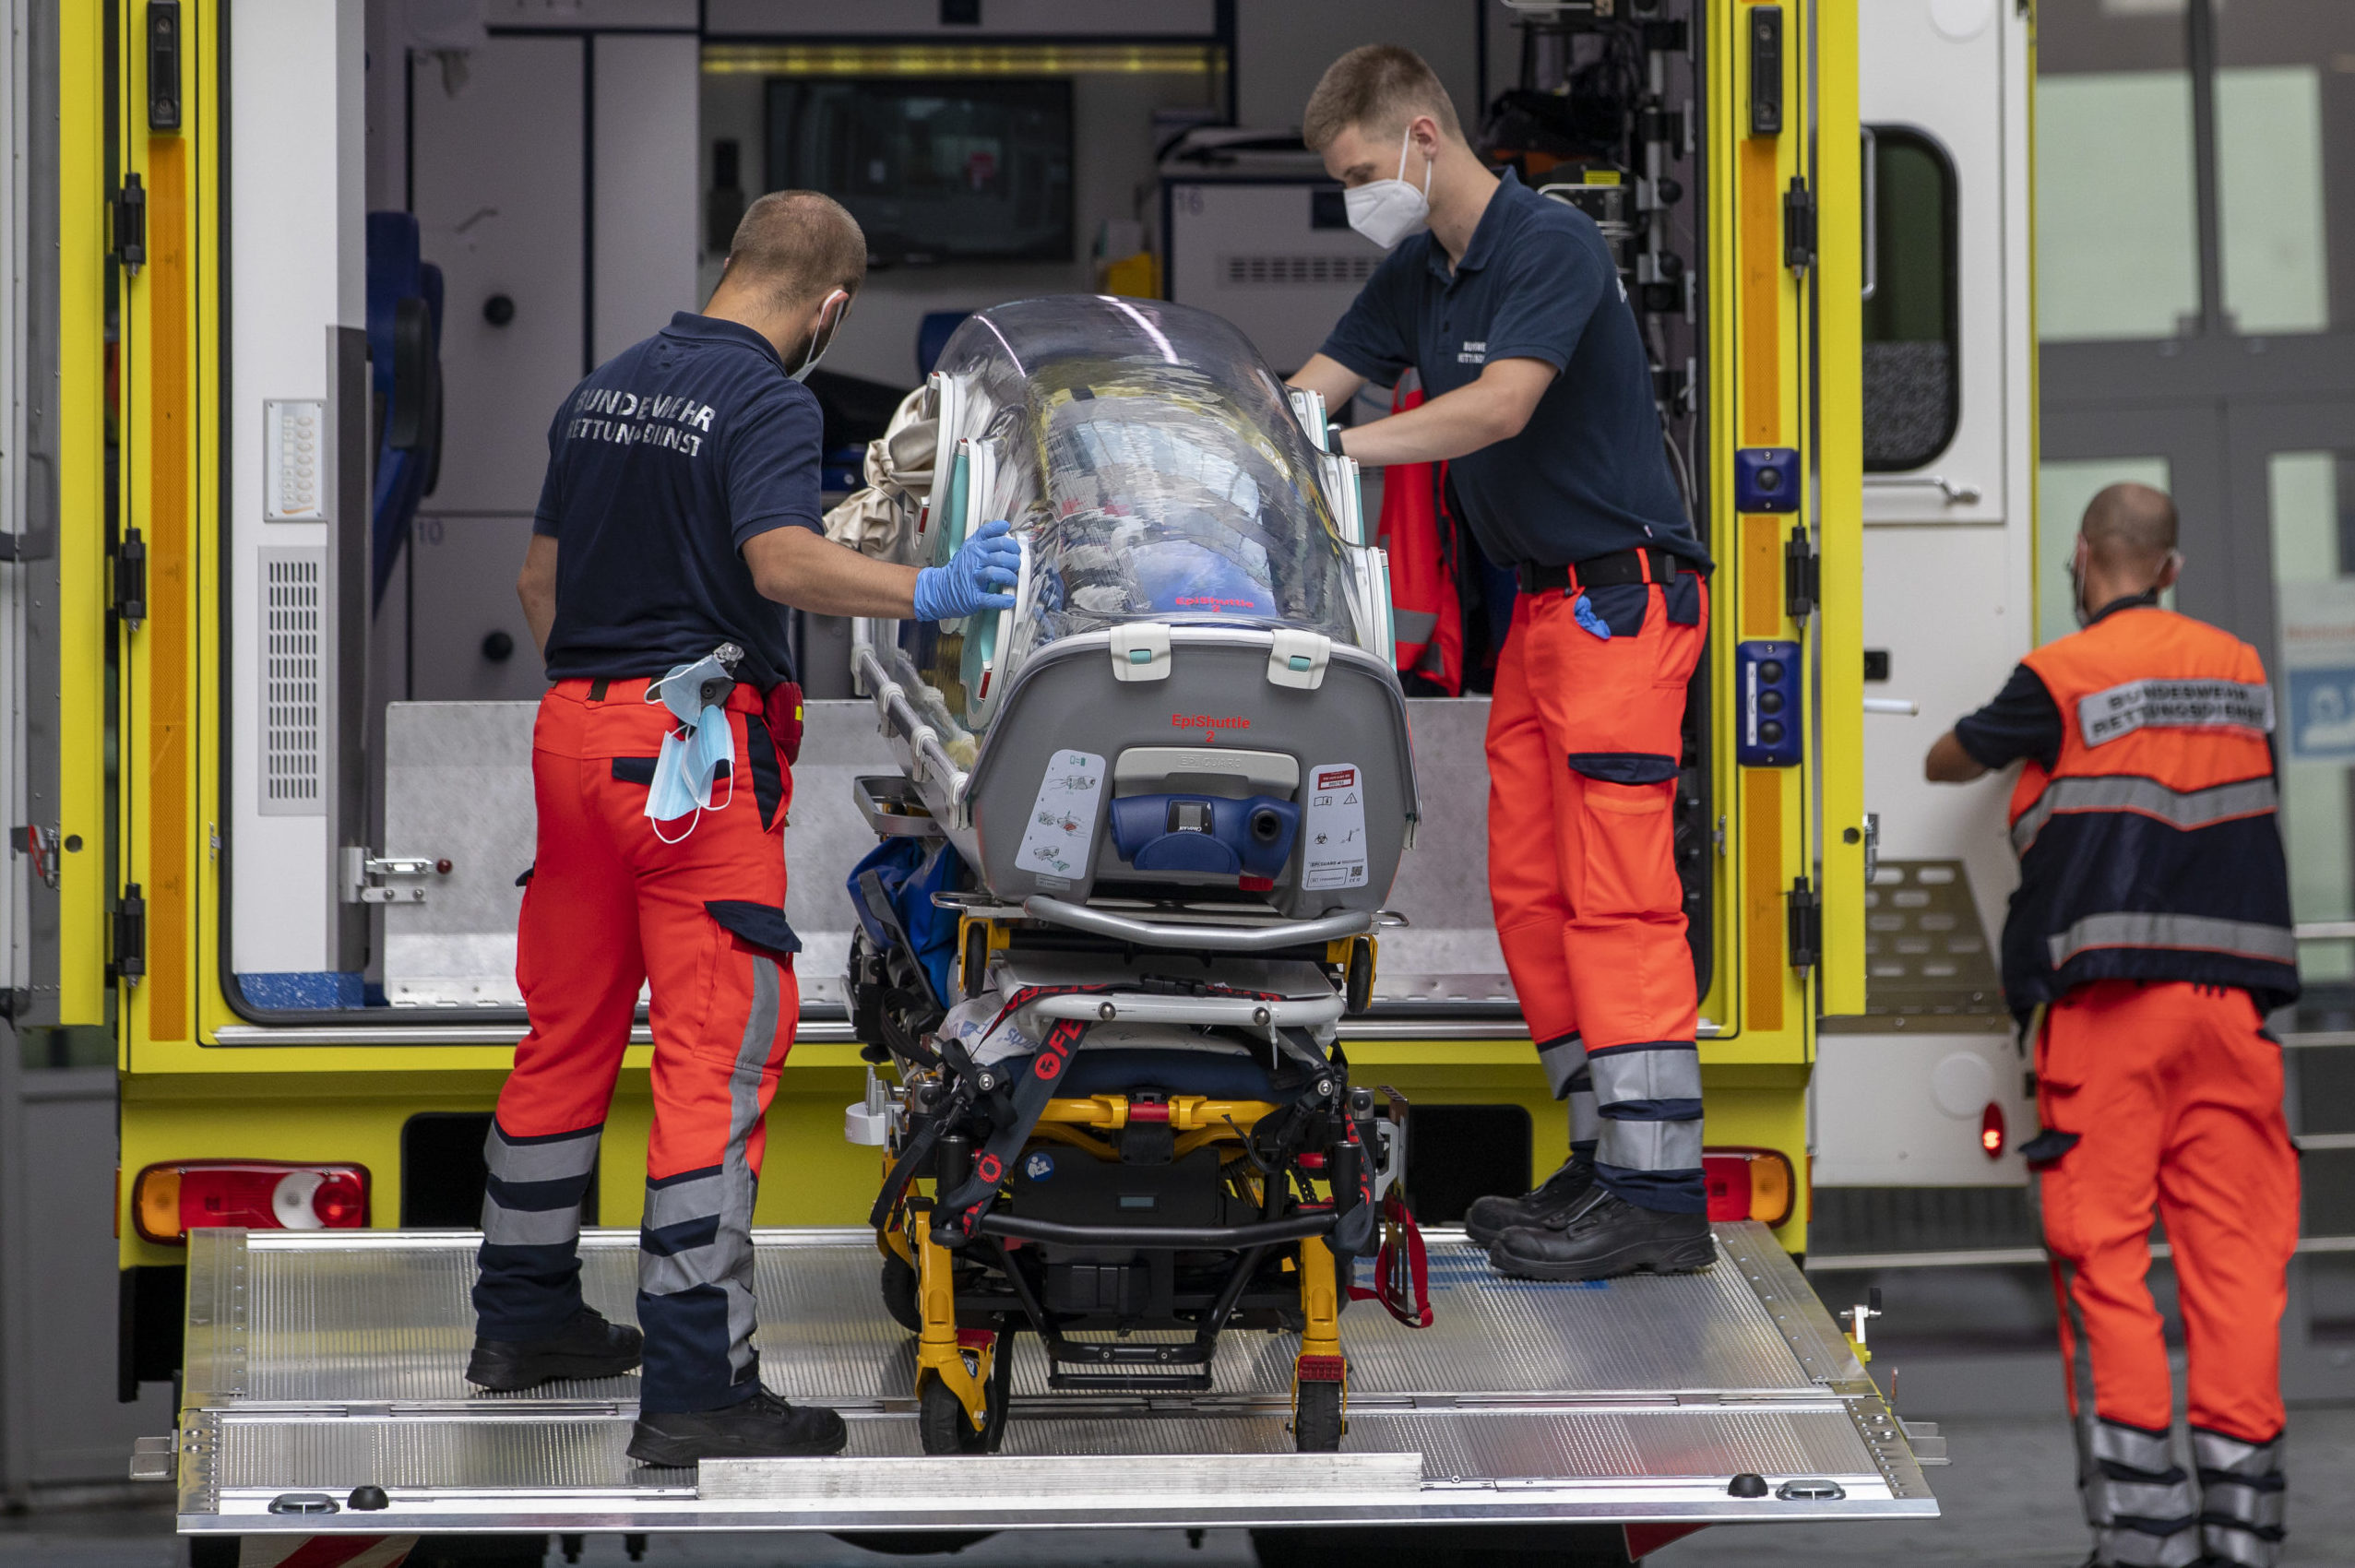 BERLIN, GERMANY - AUGUST 22: German army emergency personnel load portable isolation unit (Epi Shuttle) into their ambulance that was used to transport Russian opposition figure Alexei Navalny at Charite hospital on August 22, 2020 in Berlin, Germany. (Photo by Maja Hitij/Getty Images)